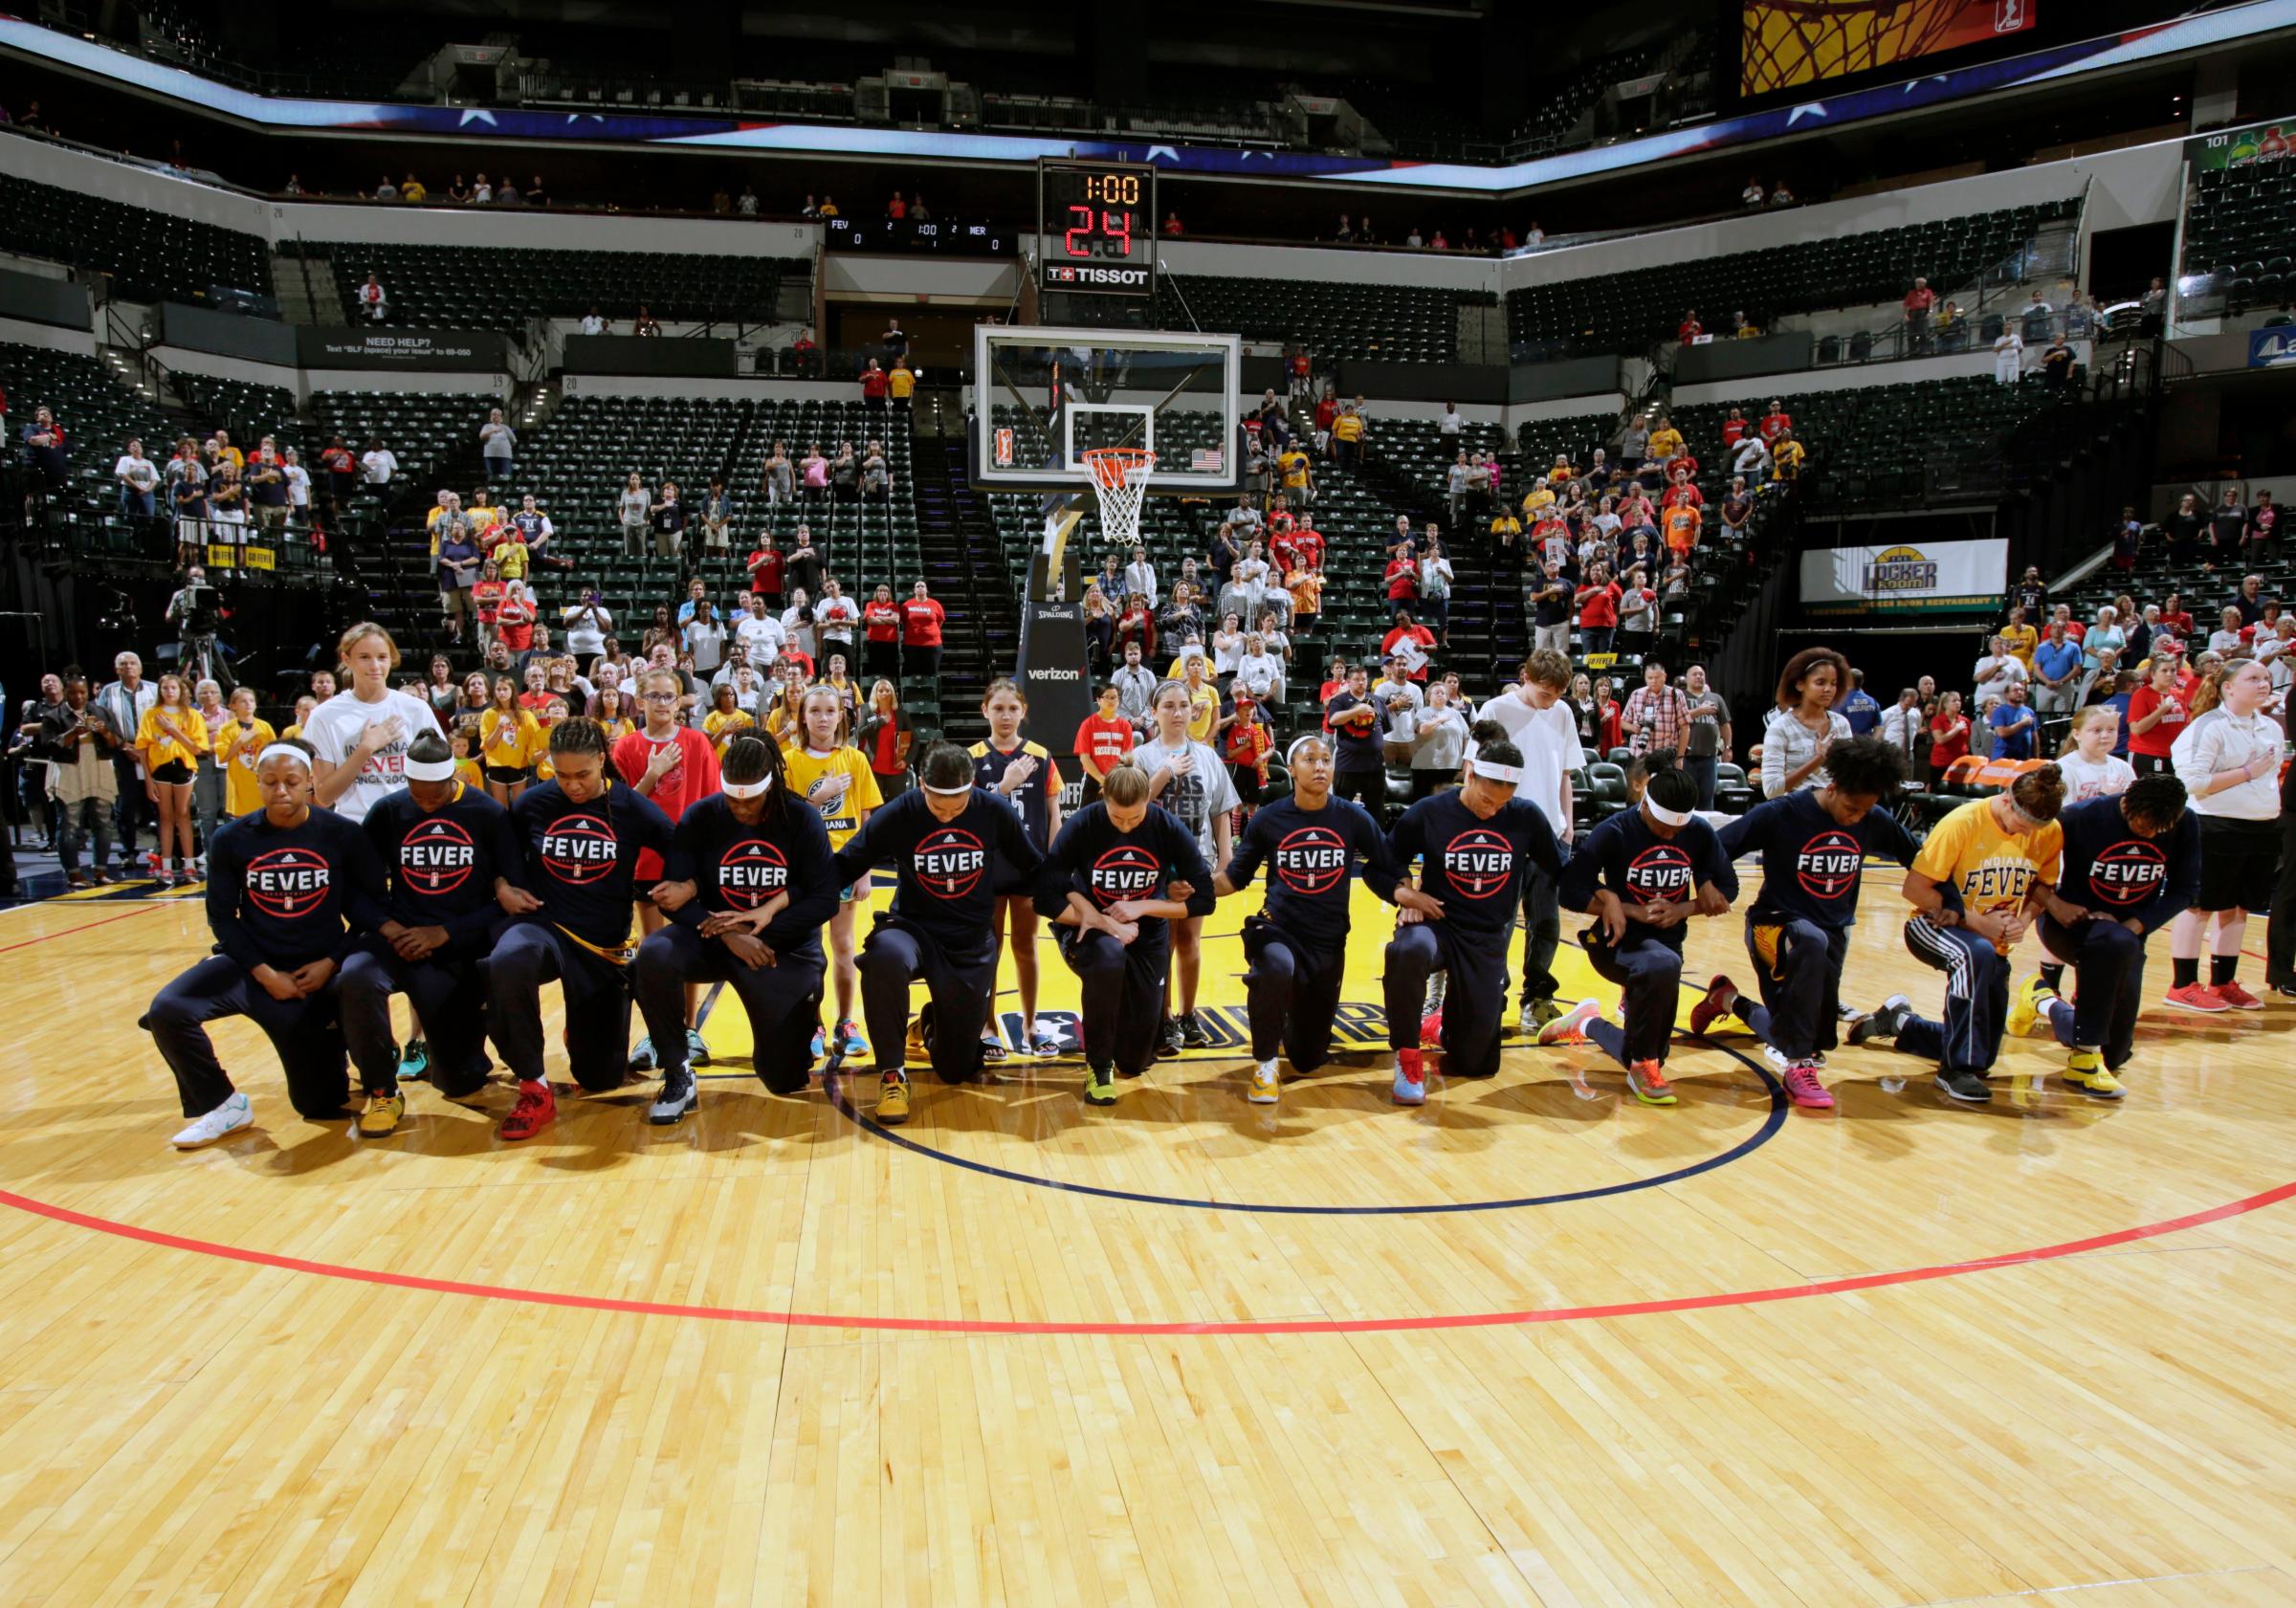 The Indiana Fever kneel during the National Anthem before the game against the Phoenix Mercury during Round One of the 2016 WNBA Playoffs at Bankers Life Fieldhouse in Indianapolis, Indiana, on Sept. 21, 2016.